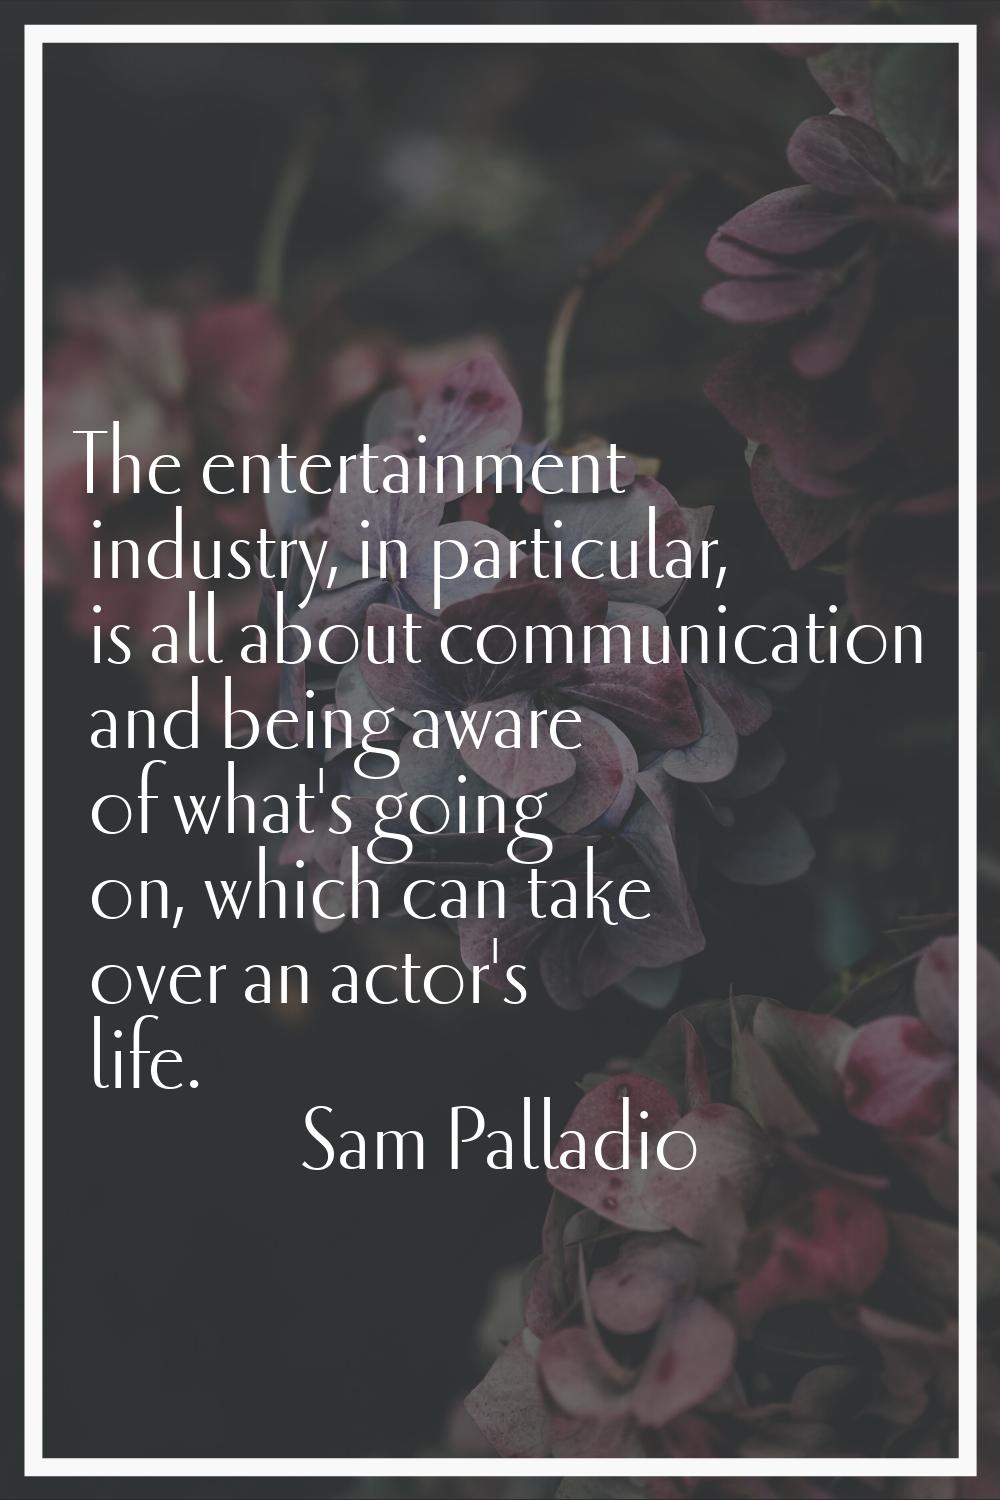 The entertainment industry, in particular, is all about communication and being aware of what's goi